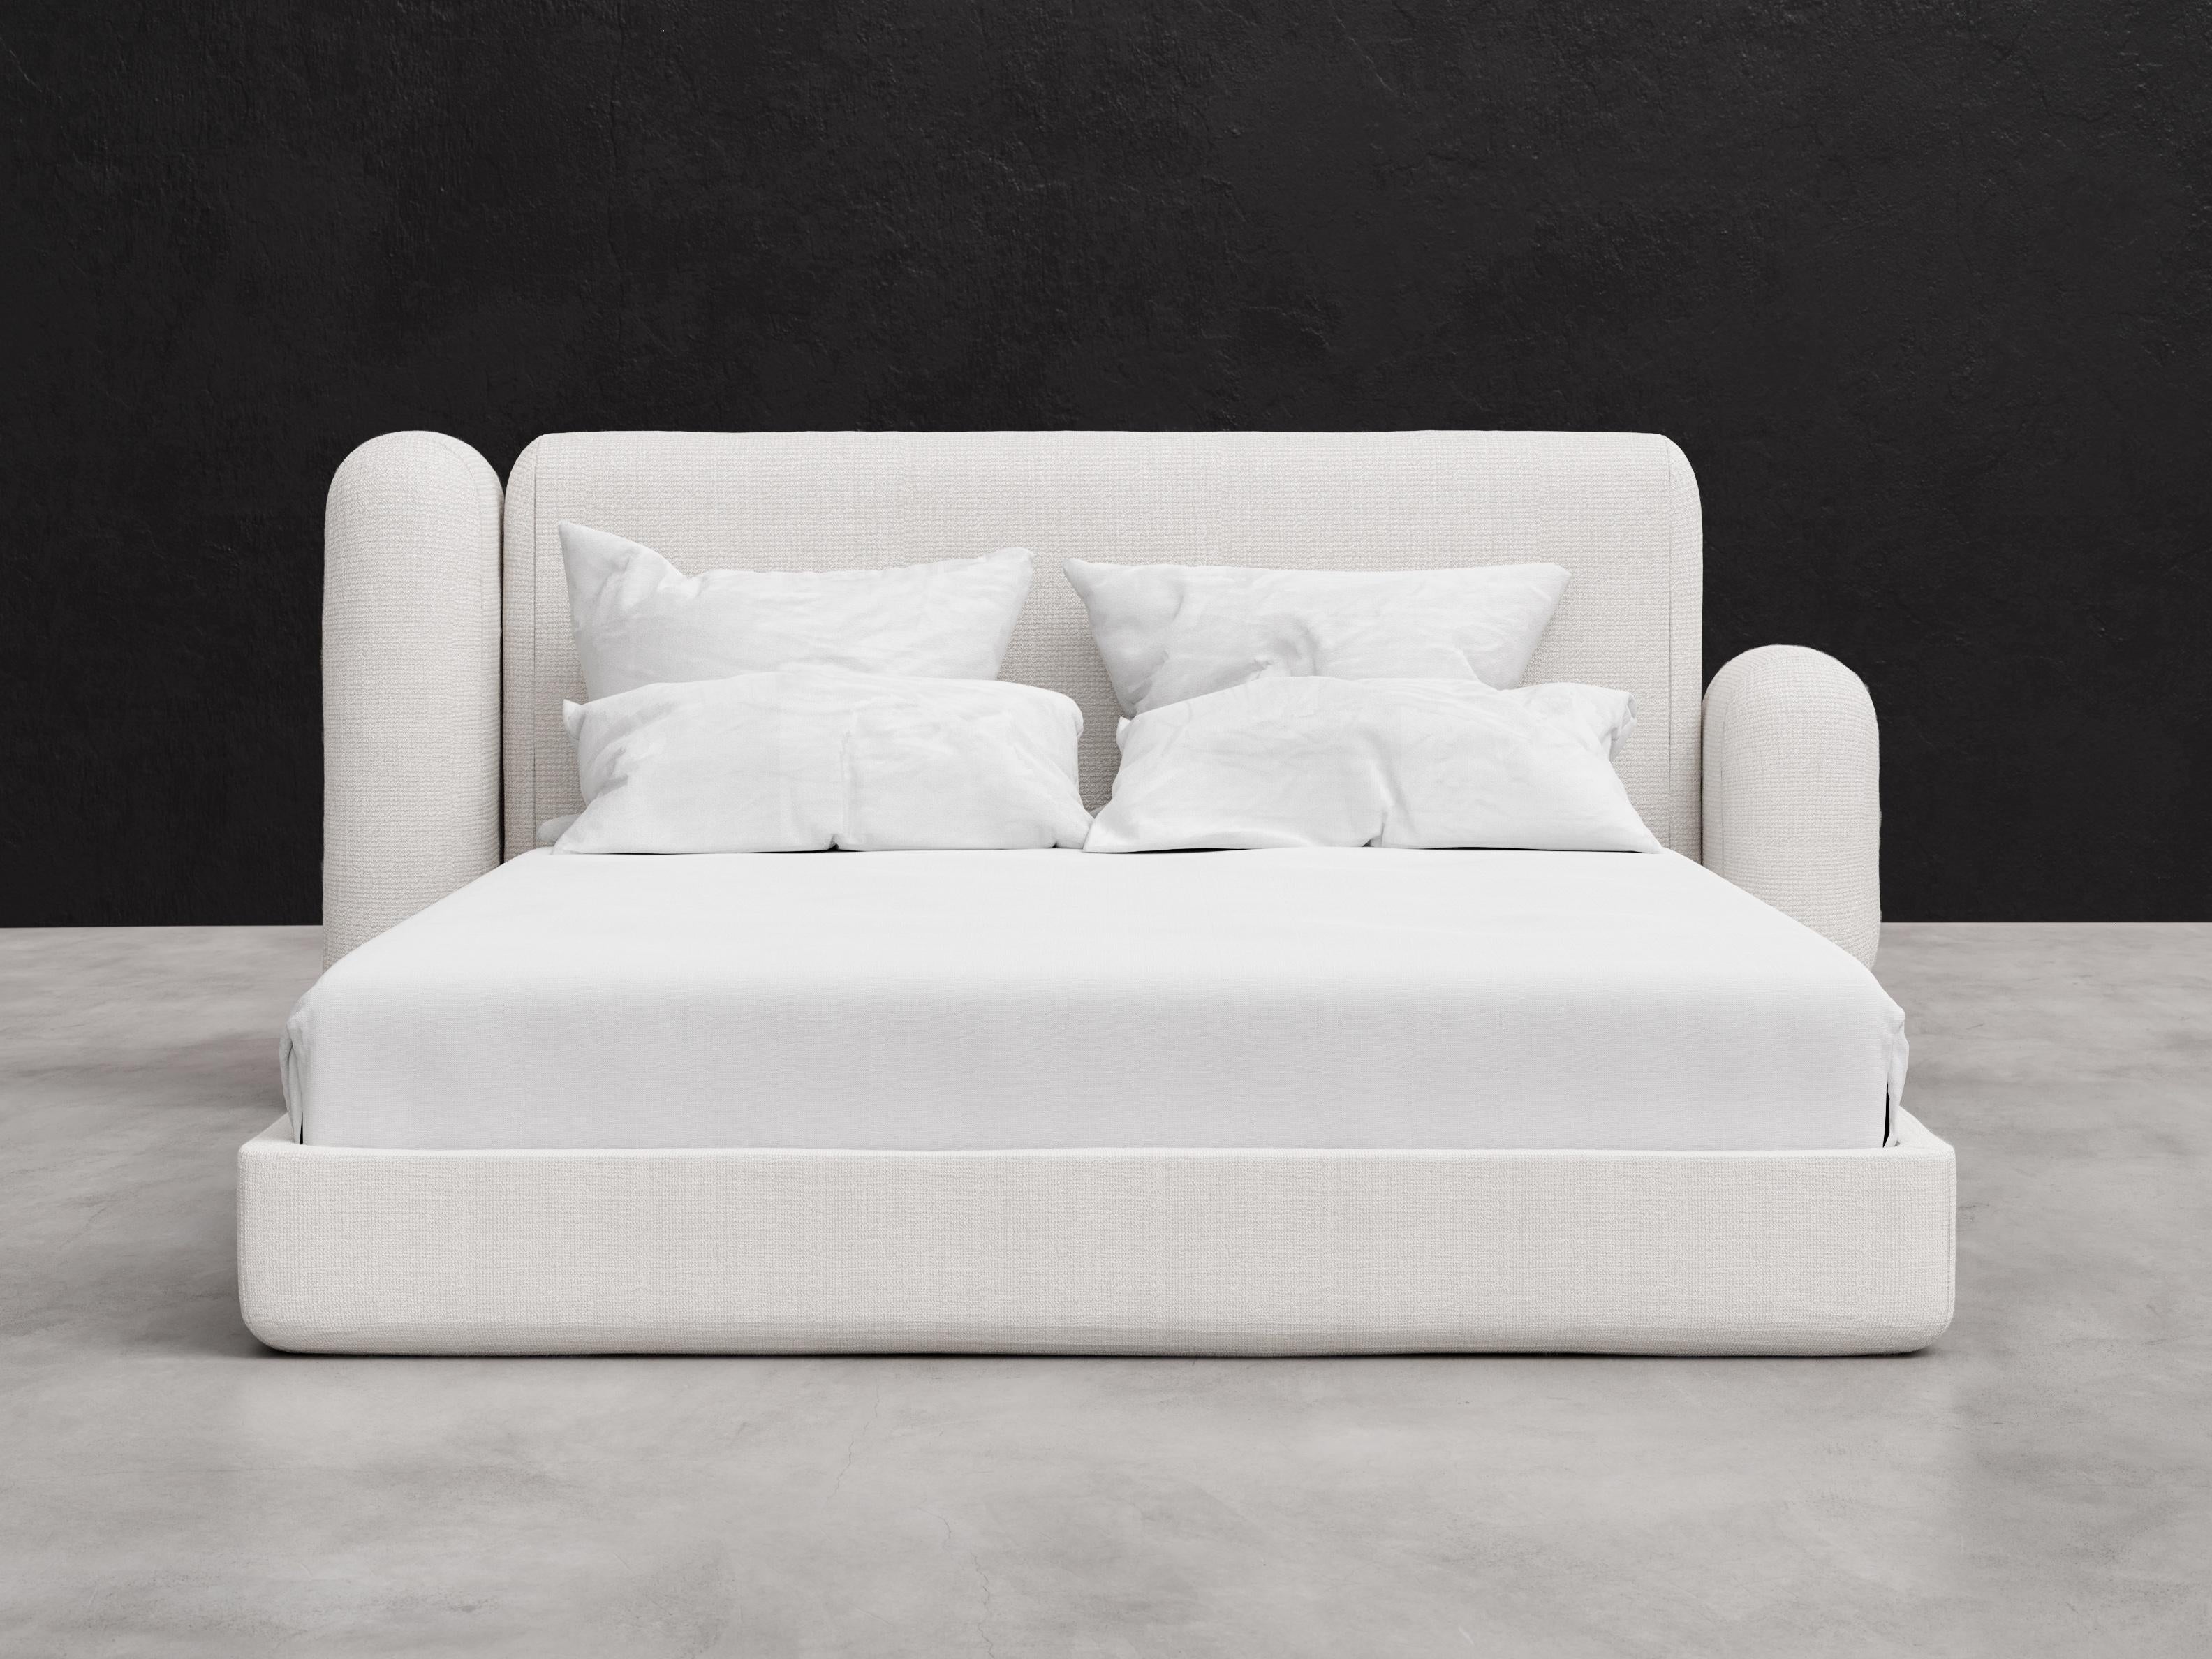 ASYM BED - Modern Asymmetrical Bed in Curly Lamb Boucle in Soft White

Introducing the Asym Bed in Queen Size, a stunning piece of furniture designed to add elegance and sophistication to your bedroom. With its asymmetrical design elements, this bed